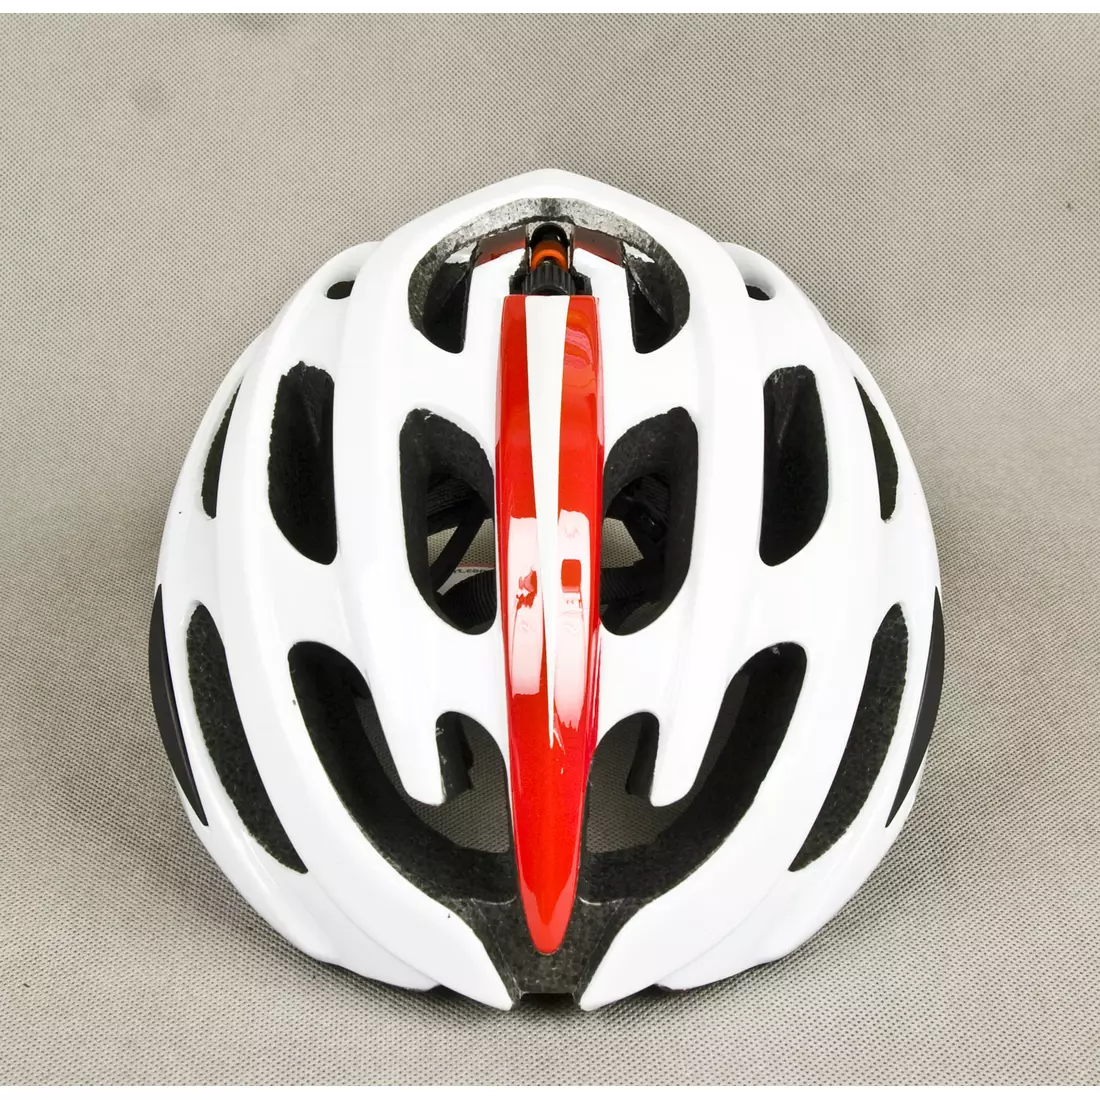 LAZER BLADE bicycle helmet white and red